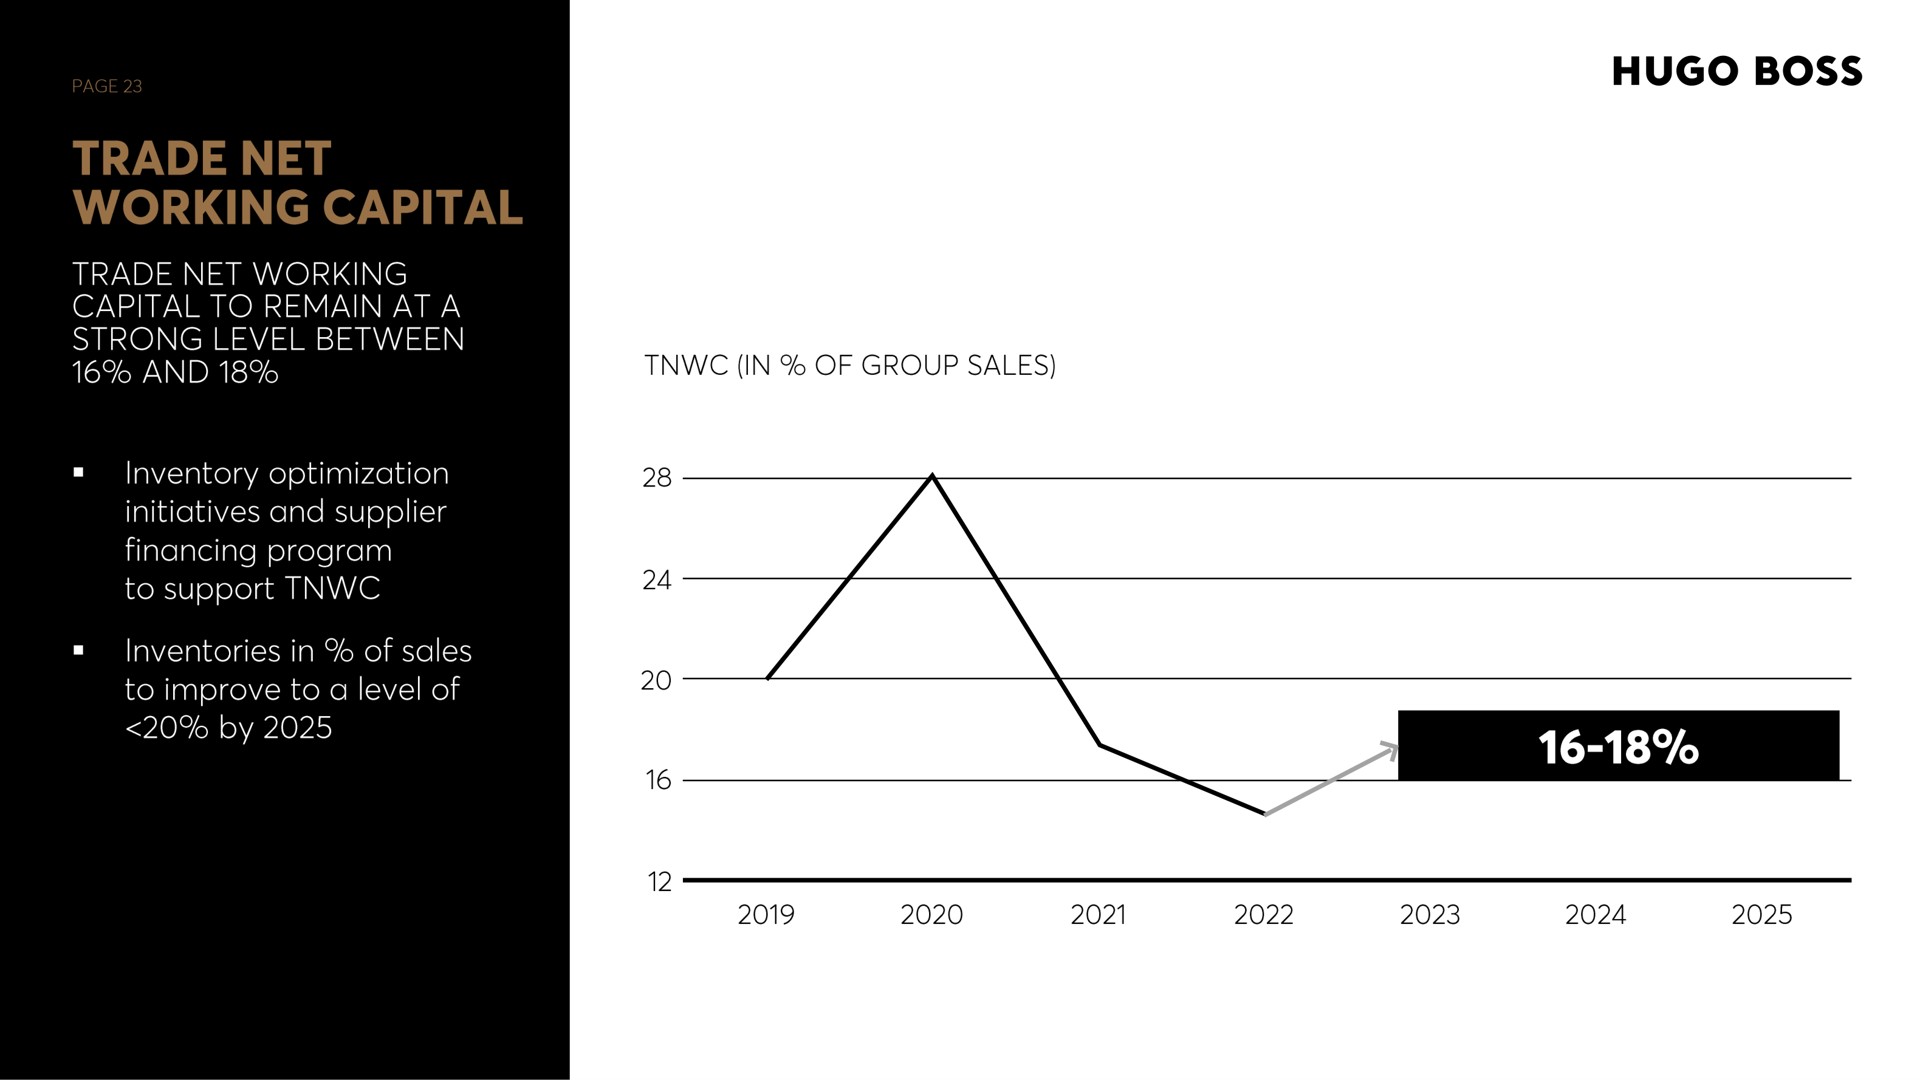 trade net working capital to remain at a strong level between initiatives and supplier to support inventories in of sales to improve to a level of by boss | Hugo Boss